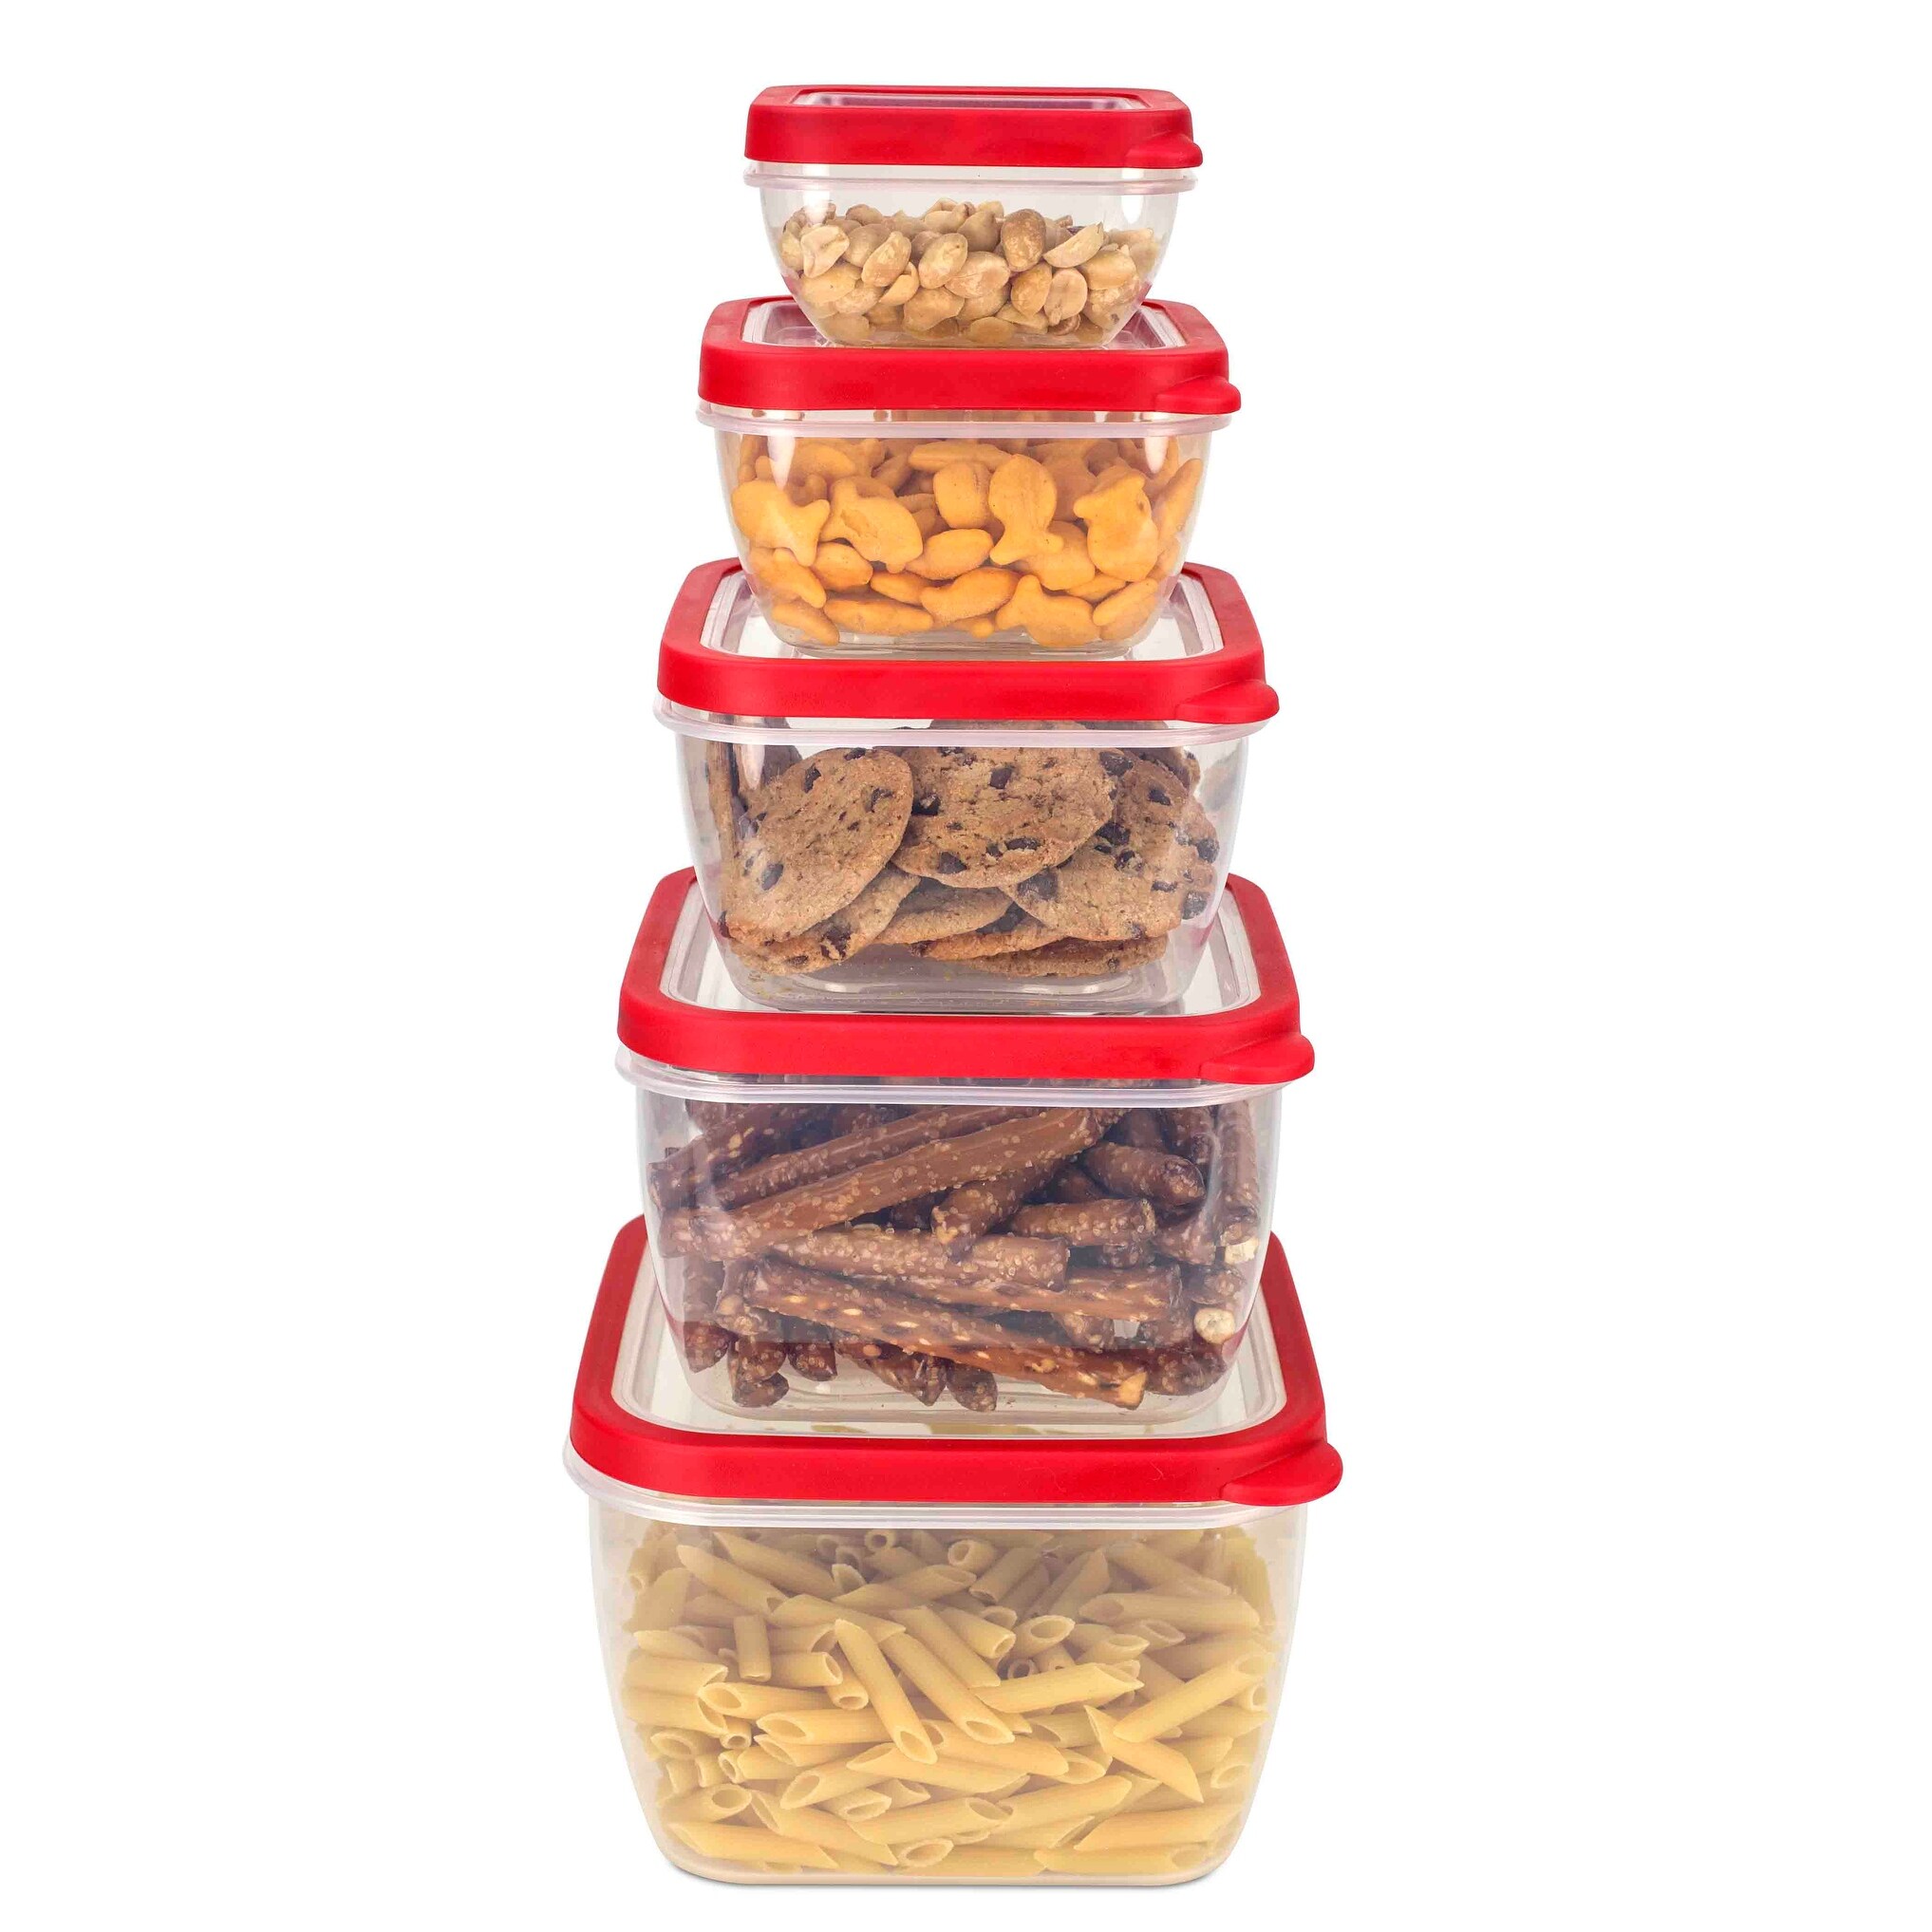 https://ak1.ostkcdn.com/images/products/is/images/direct/52c97cbabf58e17983c99cac97466f260cf1ea99/Home-Basics-Clear-and-Red-5-piece-Storage-Container-Set.jpg